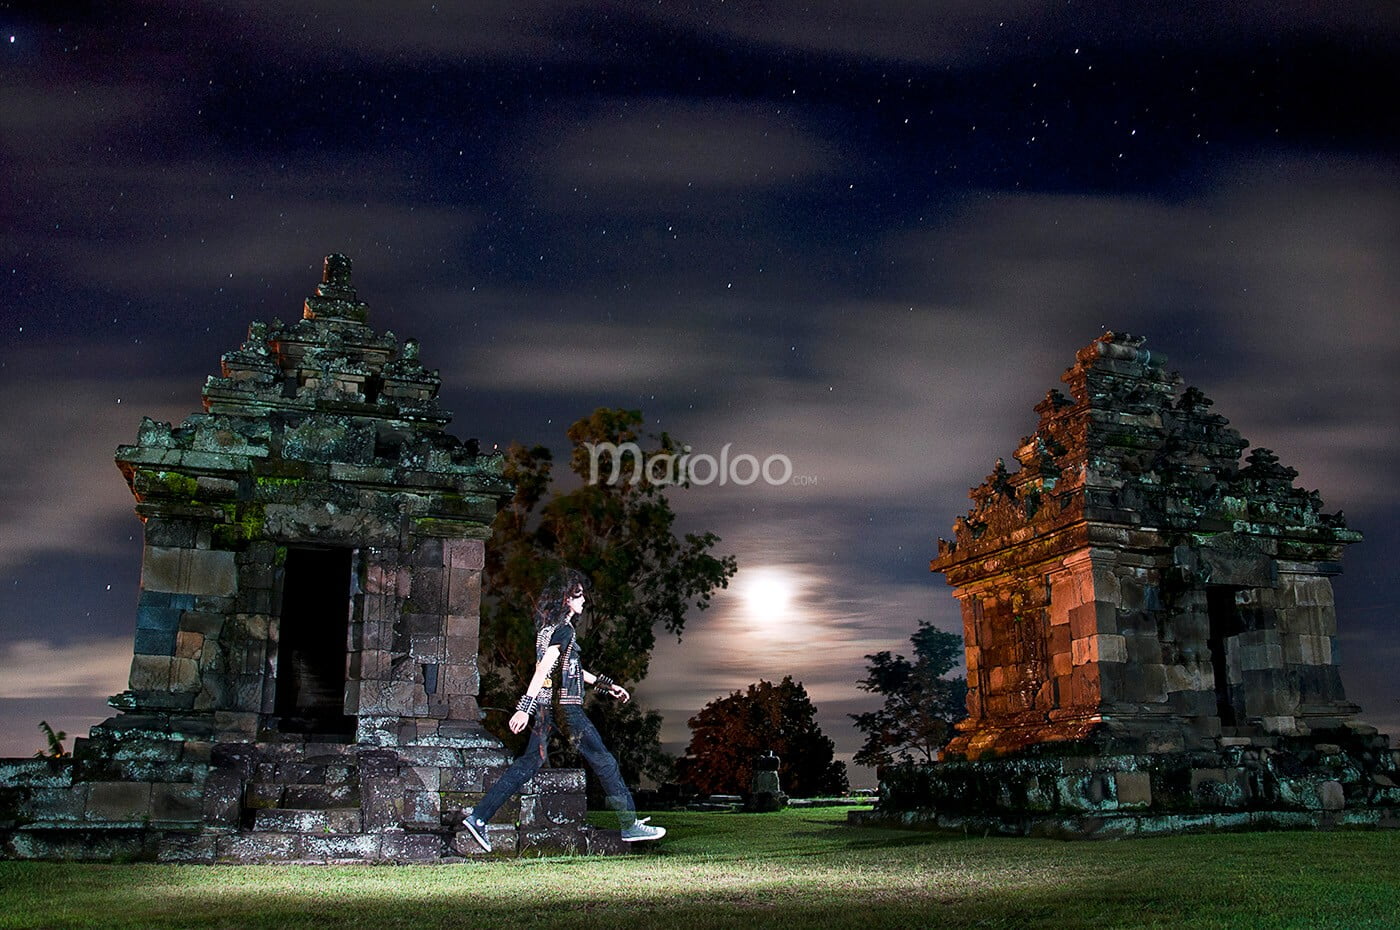 A person walking at night between ancient temple structures in Ijo Temple, with a bright moon and starry sky.